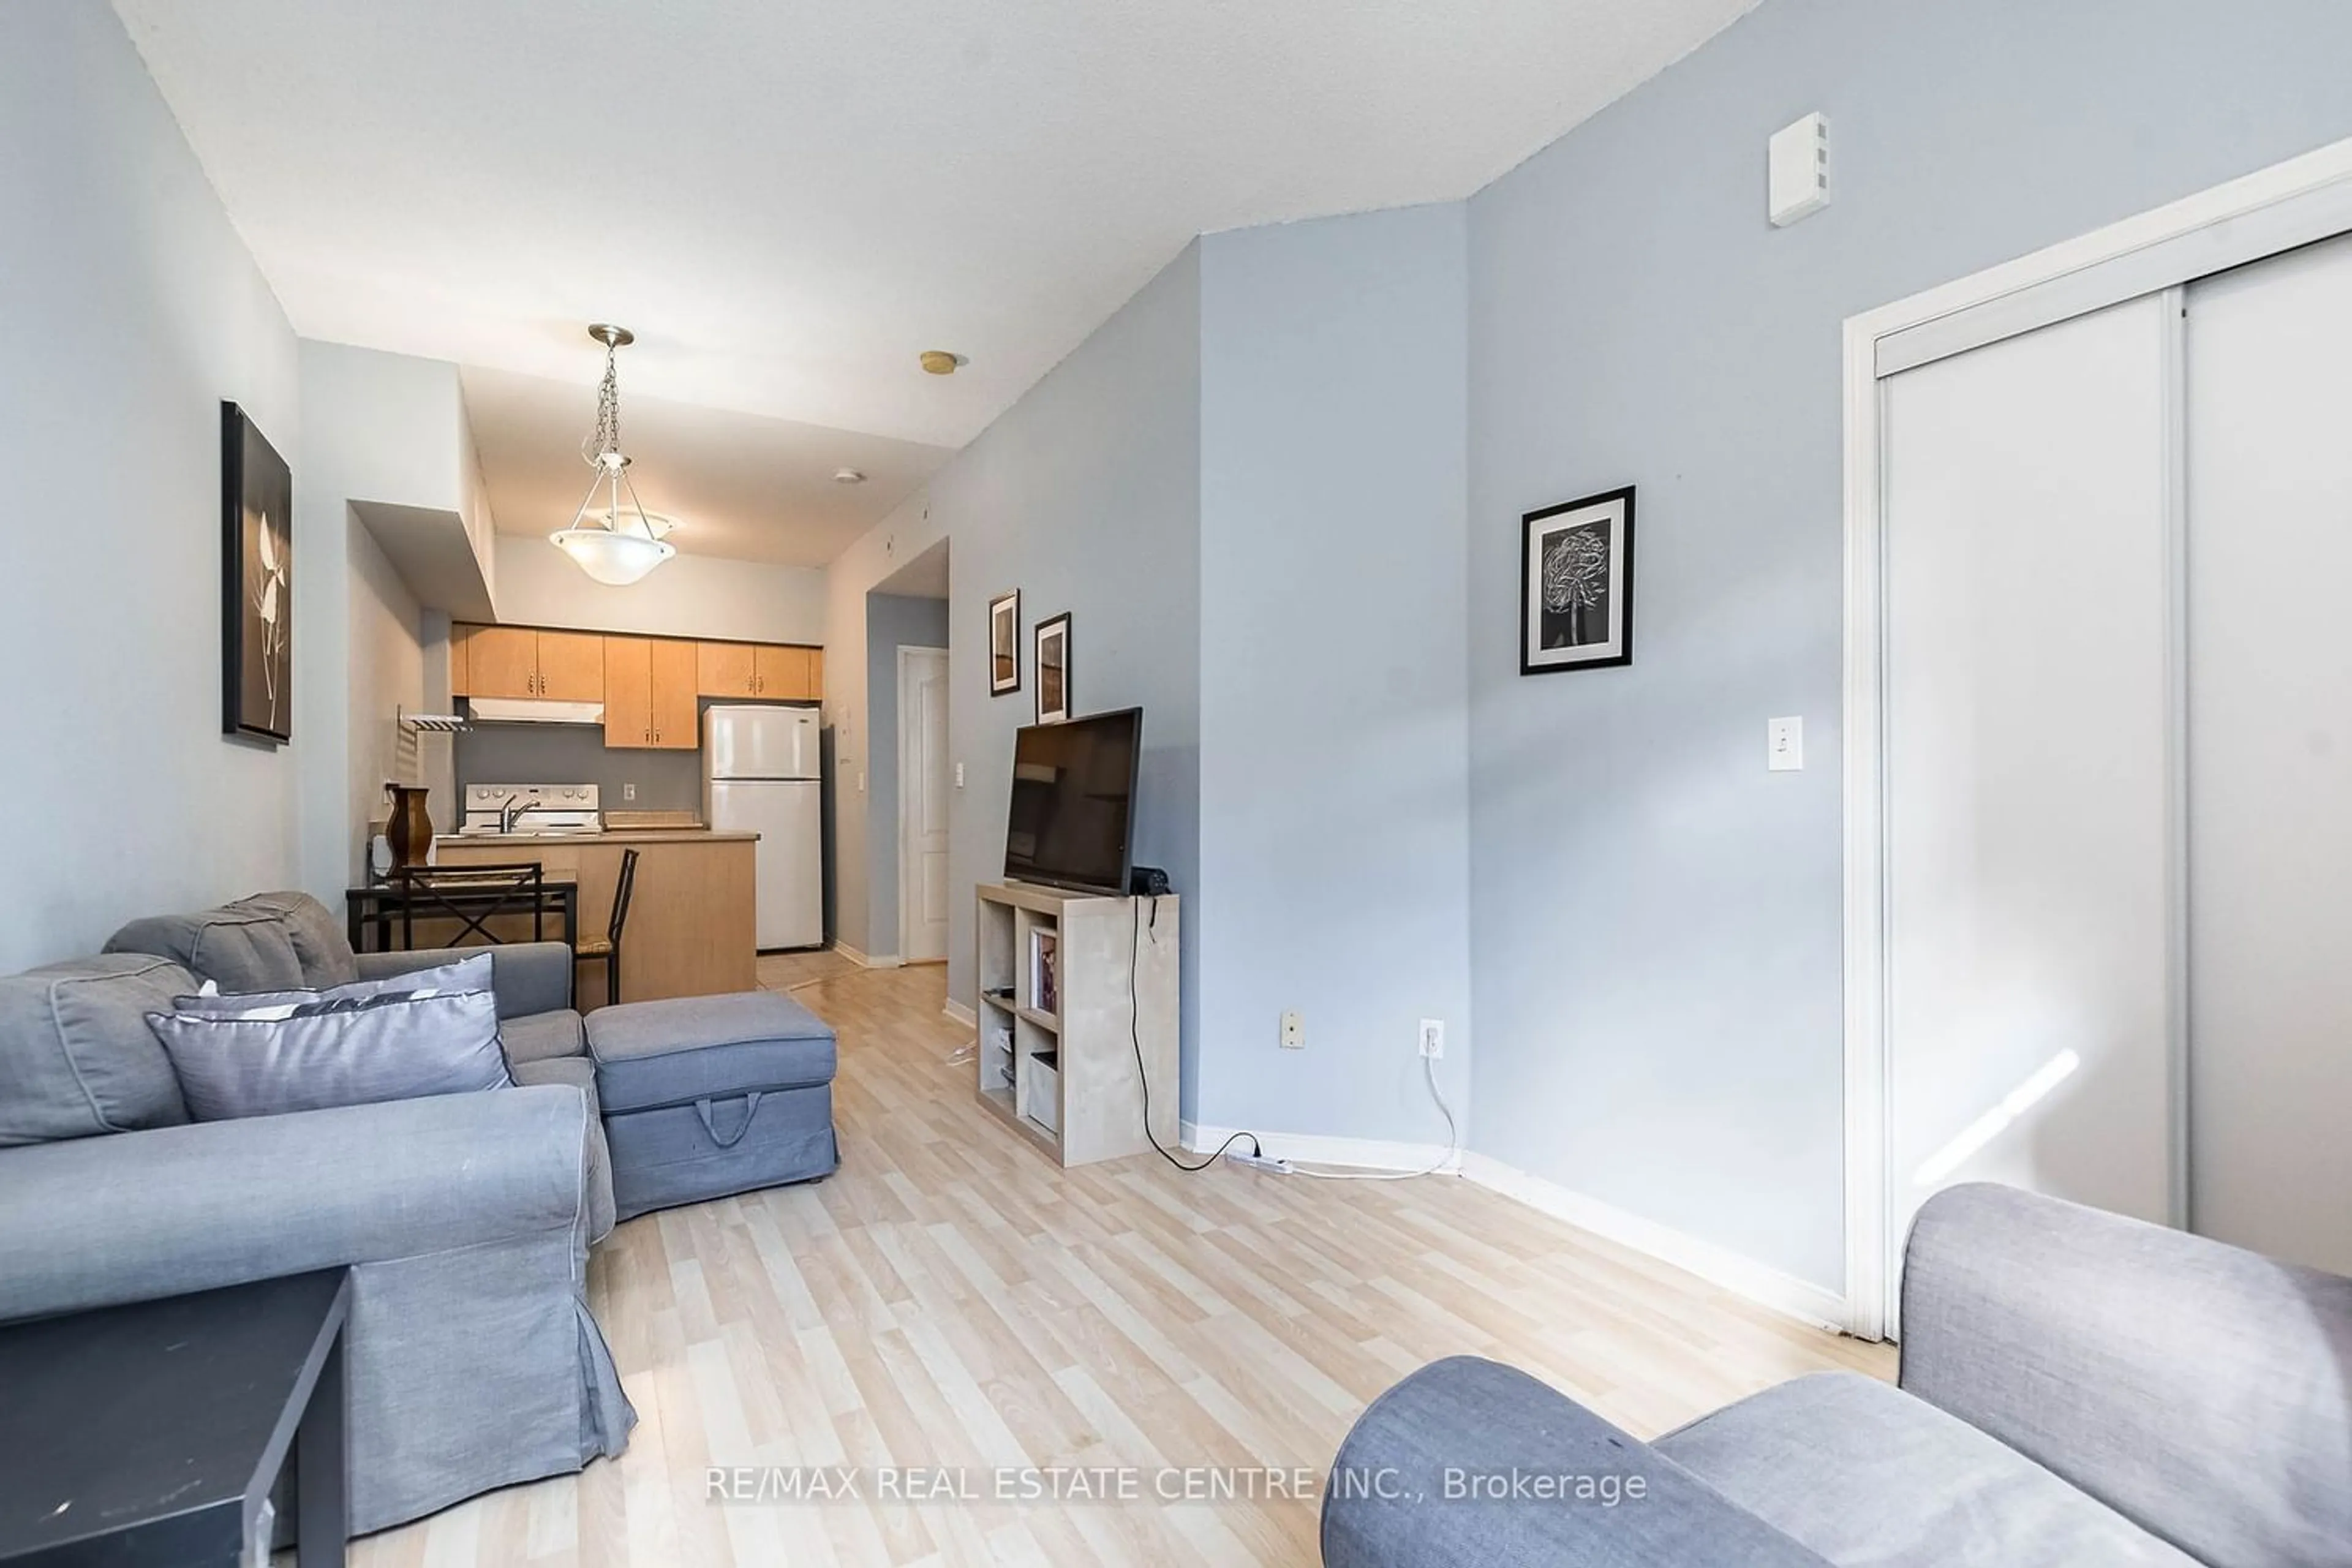 A pic of a room for 625 Shoreline Dr #13, Mississauga Ontario L5B 4K5